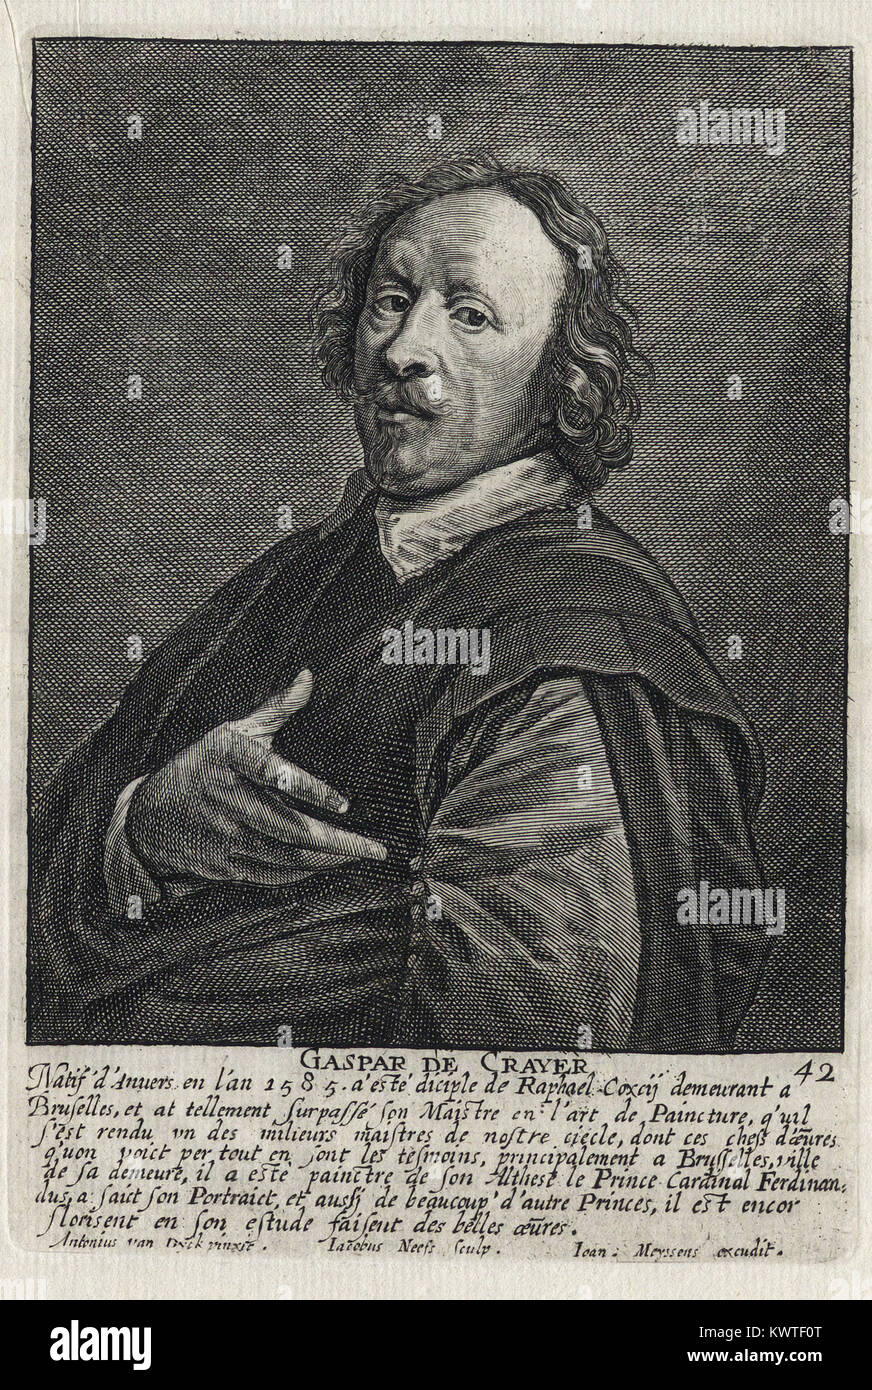 GASPAR DE CRAYER - Woodcut portrait and short biography (old french language) - Engraving 17th century Stock Photo